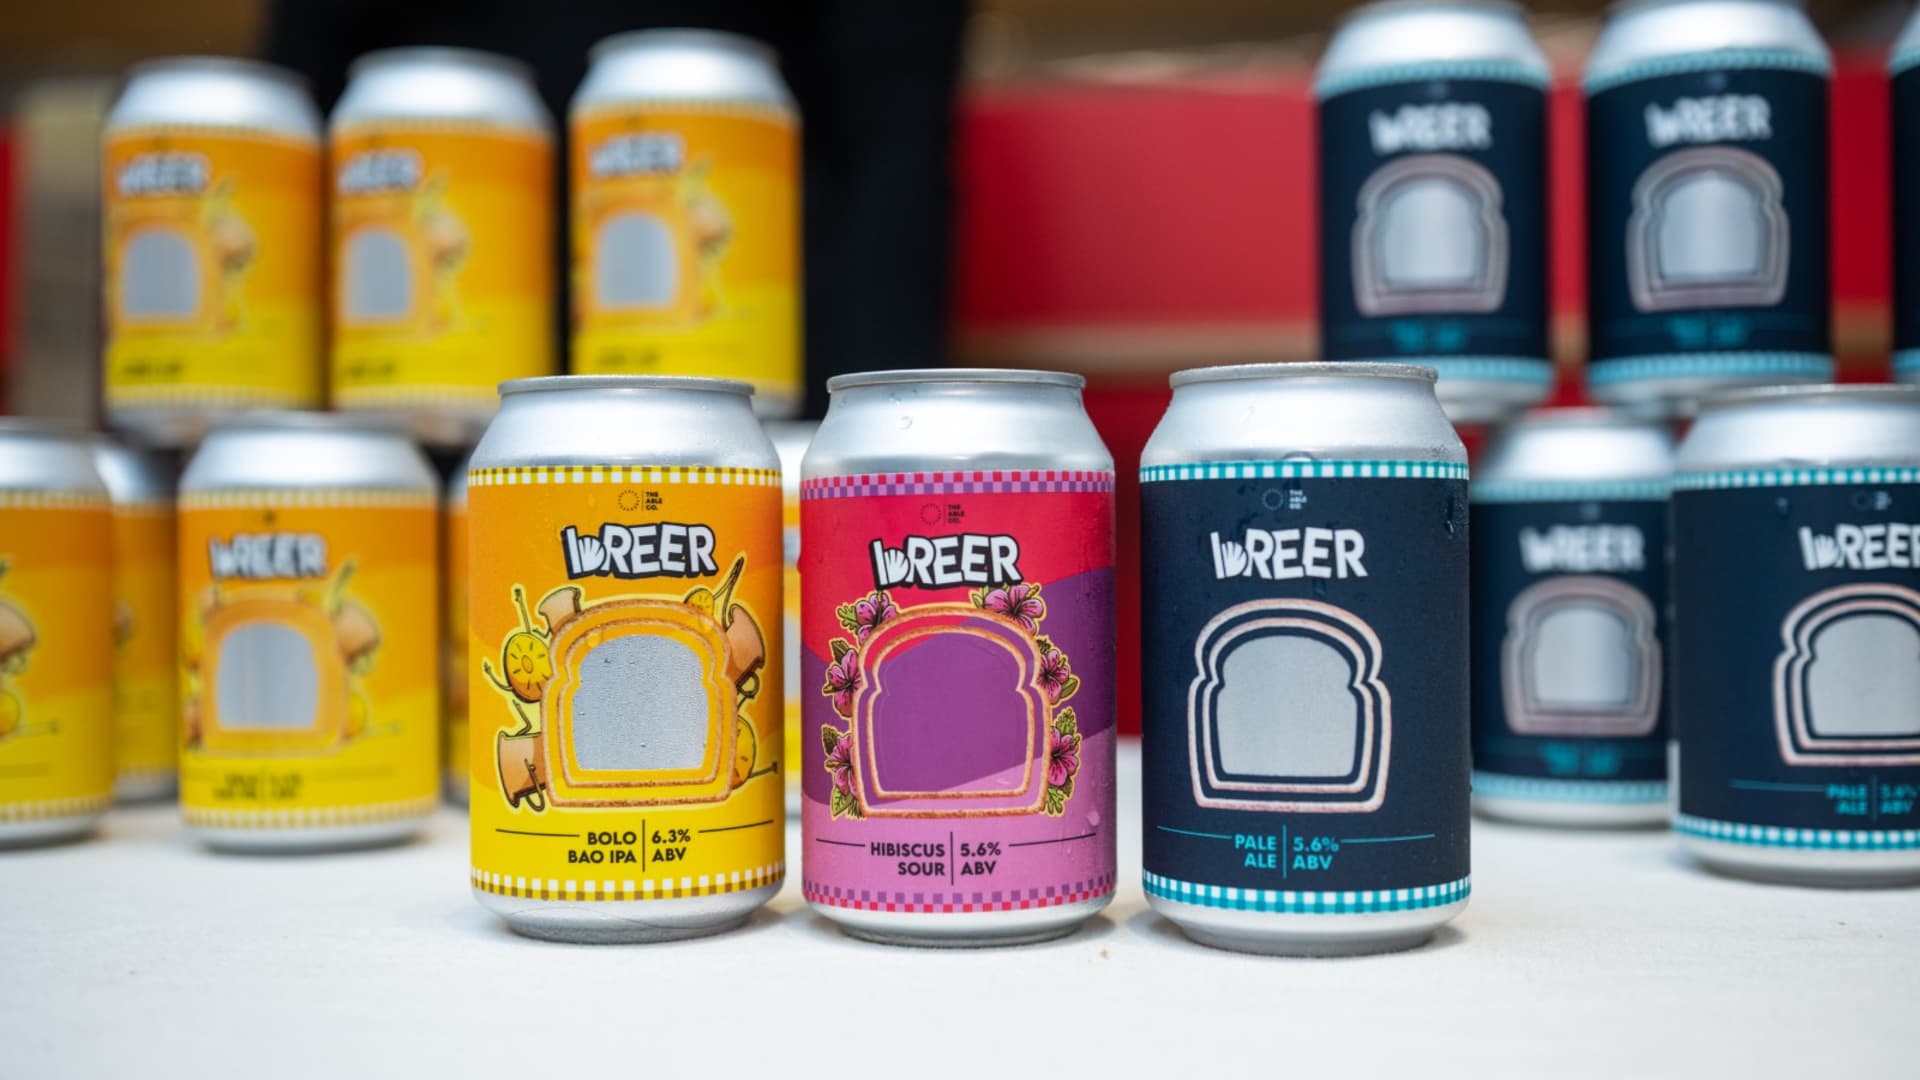 Beer from Hong Kong-based startup Breer is made from leftover bread and comes in flavors that pay homage to Hong Kong's food scene.